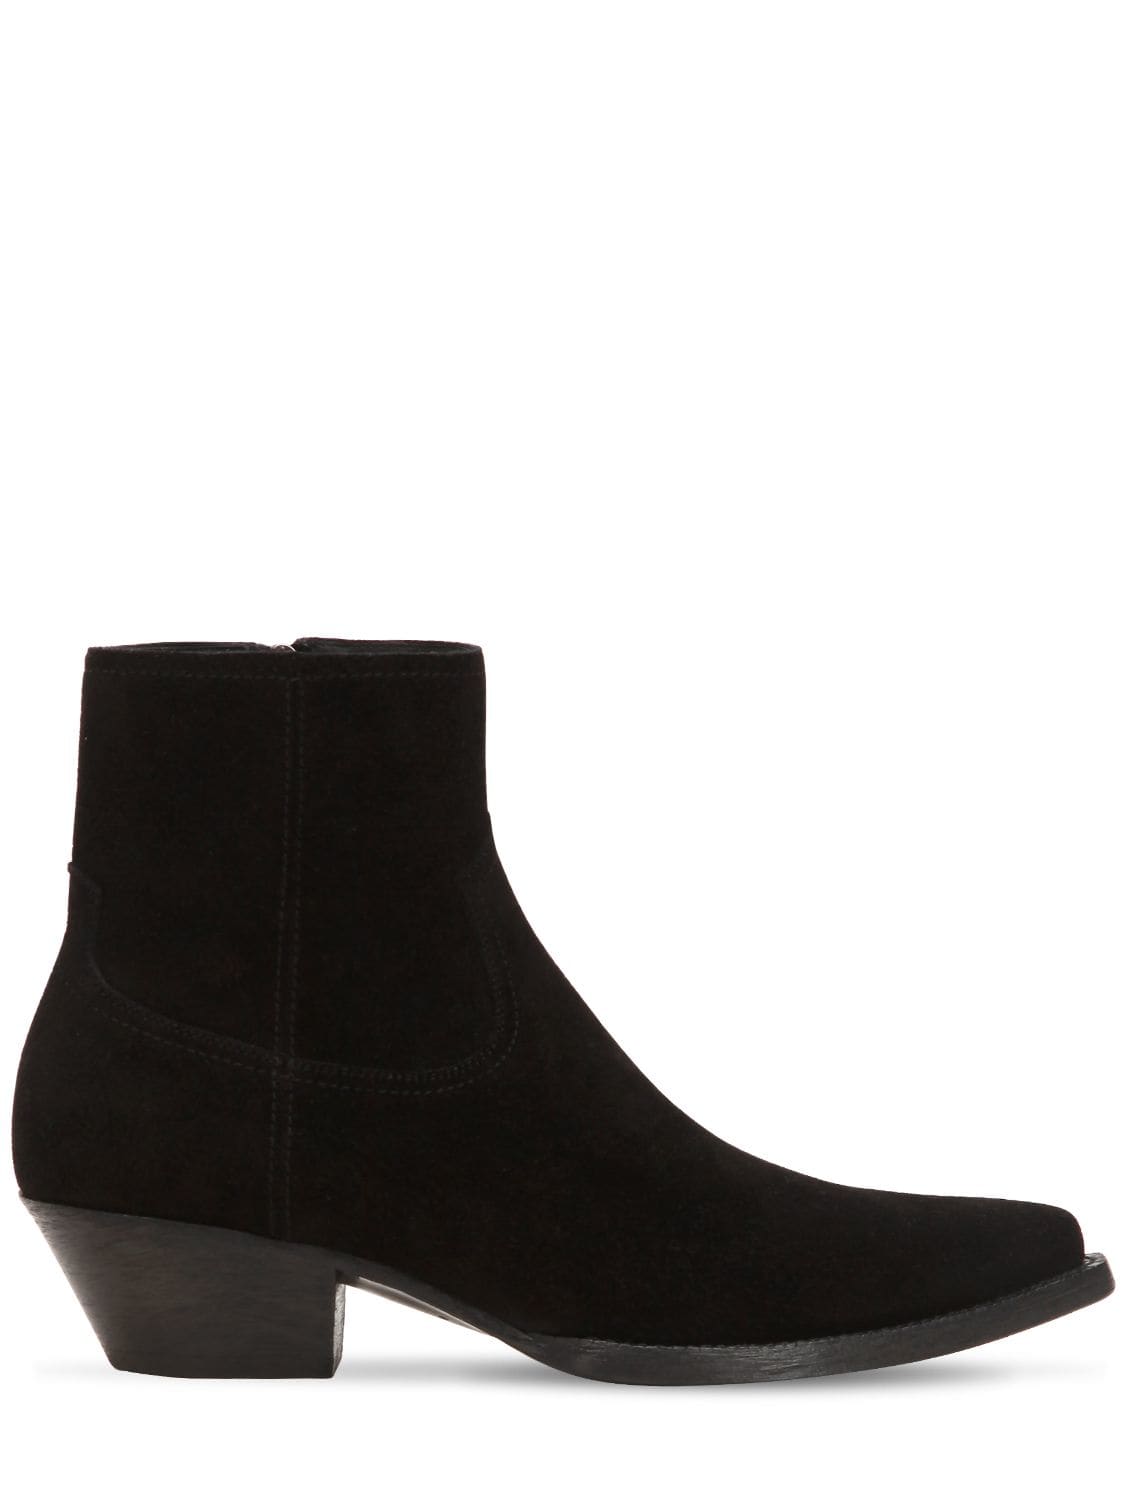 40mm Santiag Suede Ankle Boots | The Fashionisto